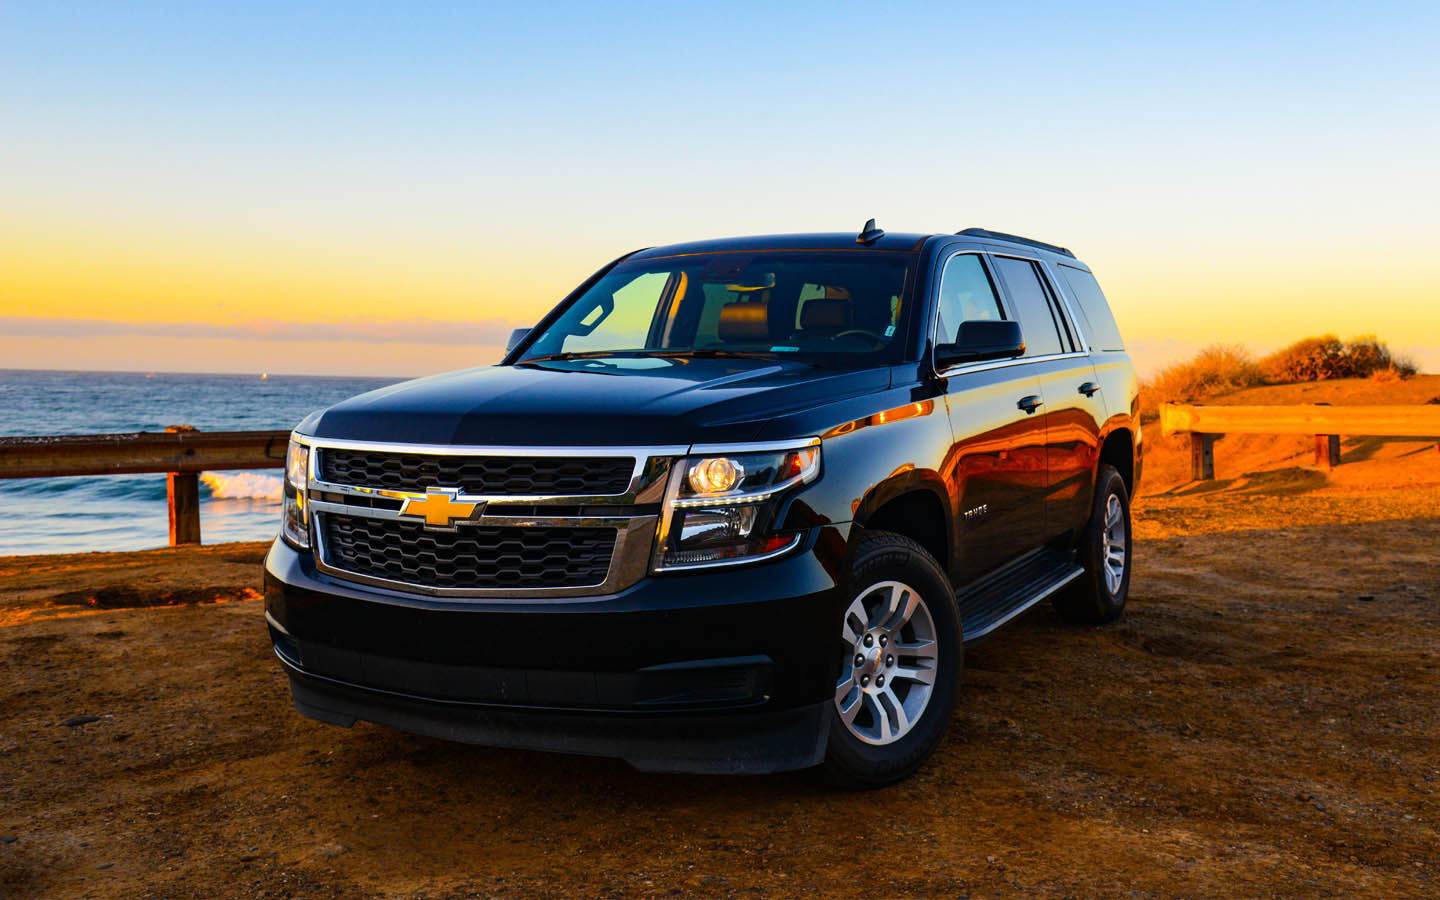 Exploring some intriguing facts about Chevrolet Suburban